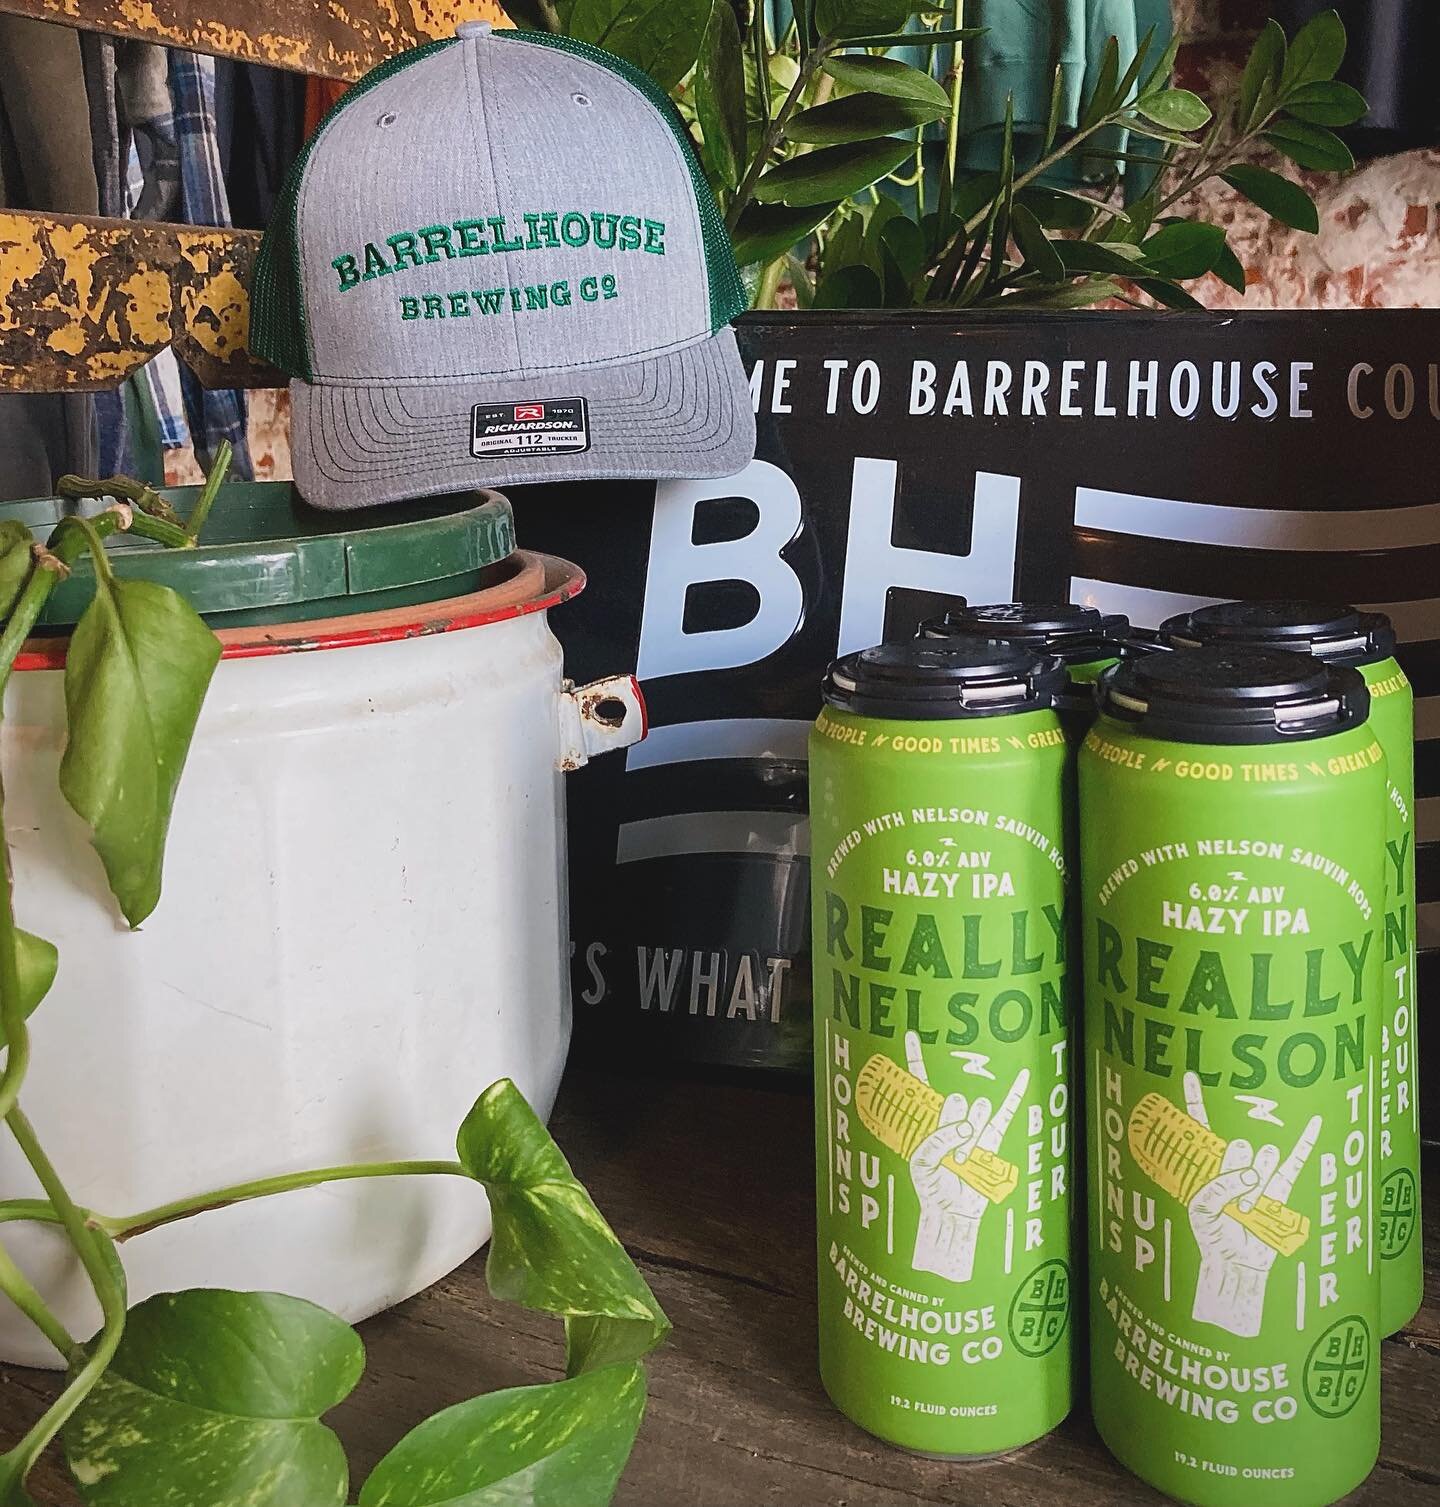 Really Nelson has arrived!

On draft and ready to stock the fridge!
Our Hazy IPA features tasty New Zealand Nelson Sauvin Hops; giving a strong hazy feel with a silky smooth finish.

It&rsquo;s March and we know St. Patrick&rsquo;s Day is just around